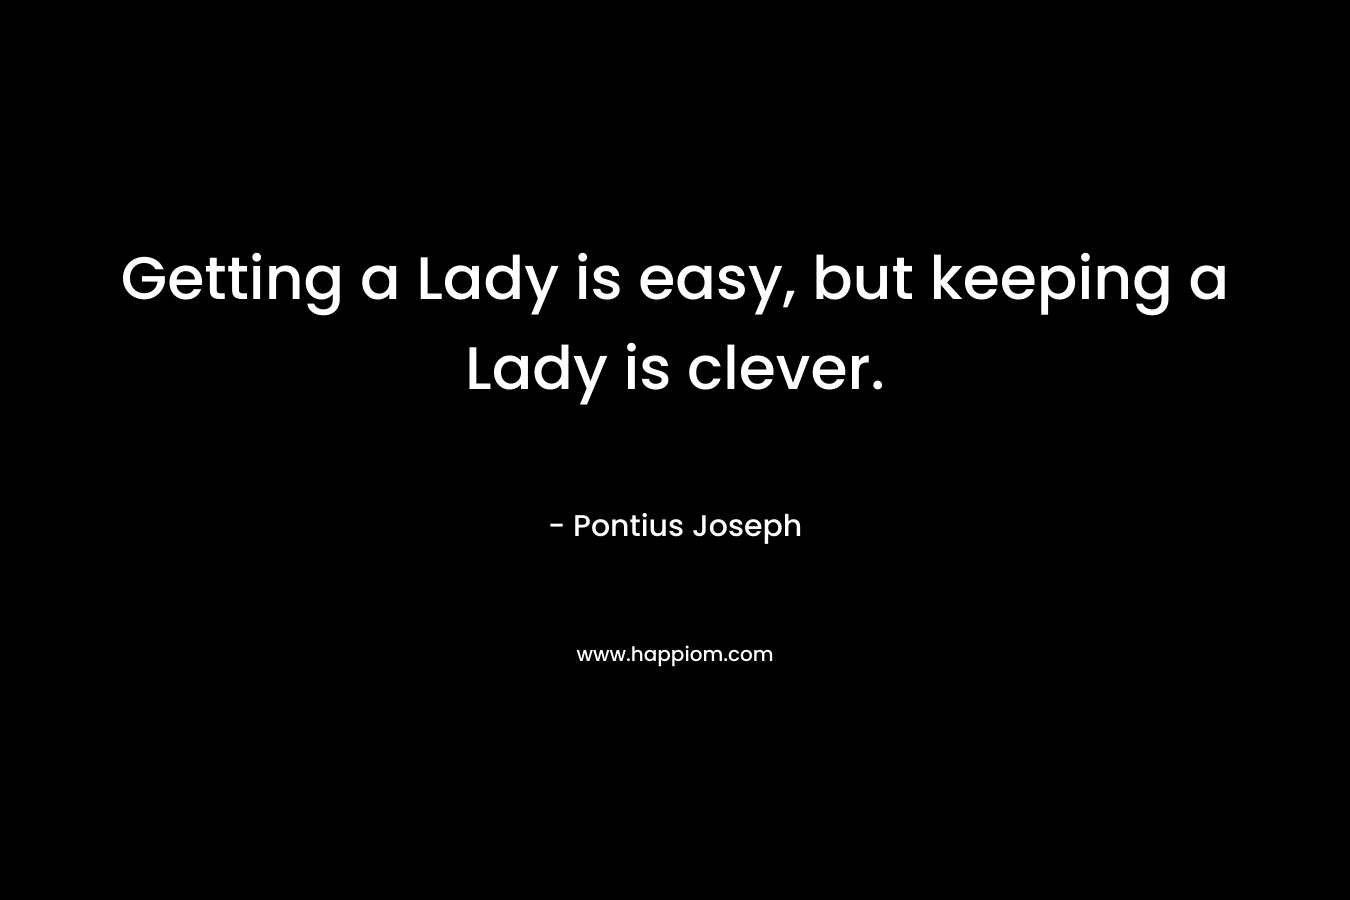 Getting a Lady is easy, but keeping a Lady is clever.